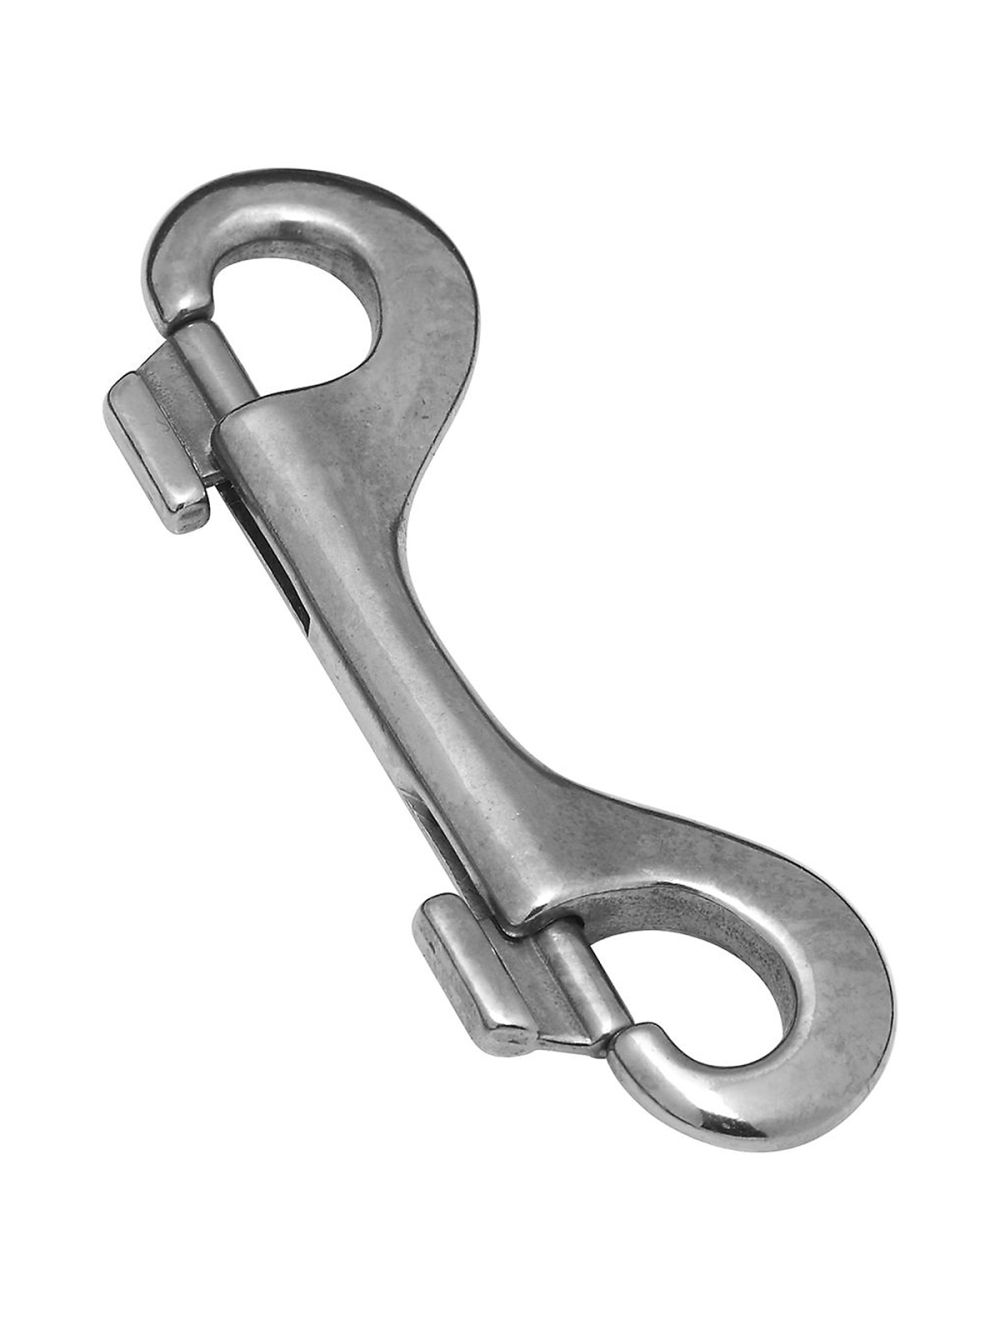 Stanley National 3160BC 3-15/16 Stainless Steel Double Bolt Snap Hook